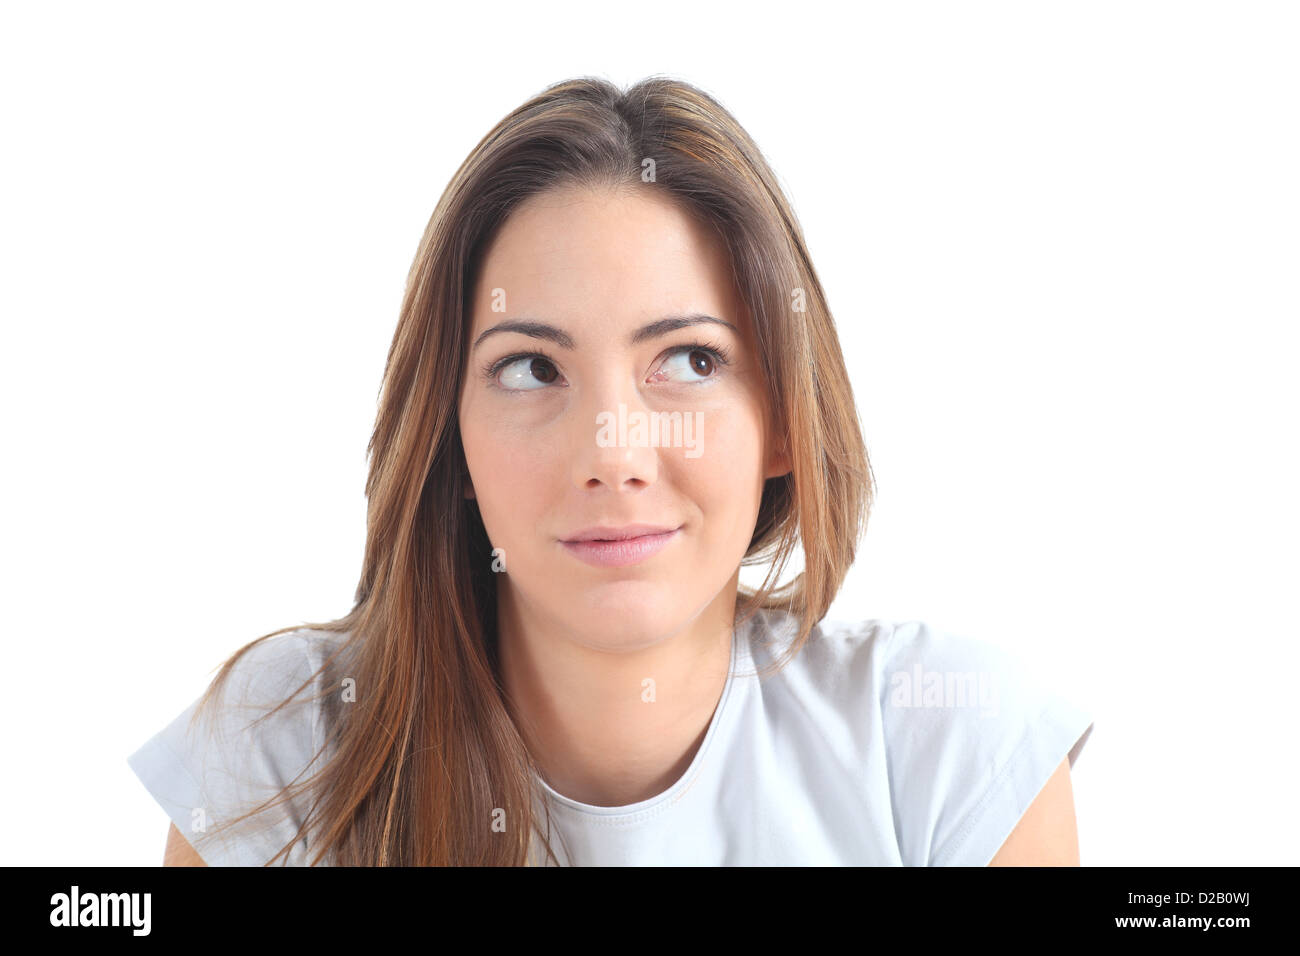 Woman thinking with her eyes looking at side on a white isolated background Stock Photo